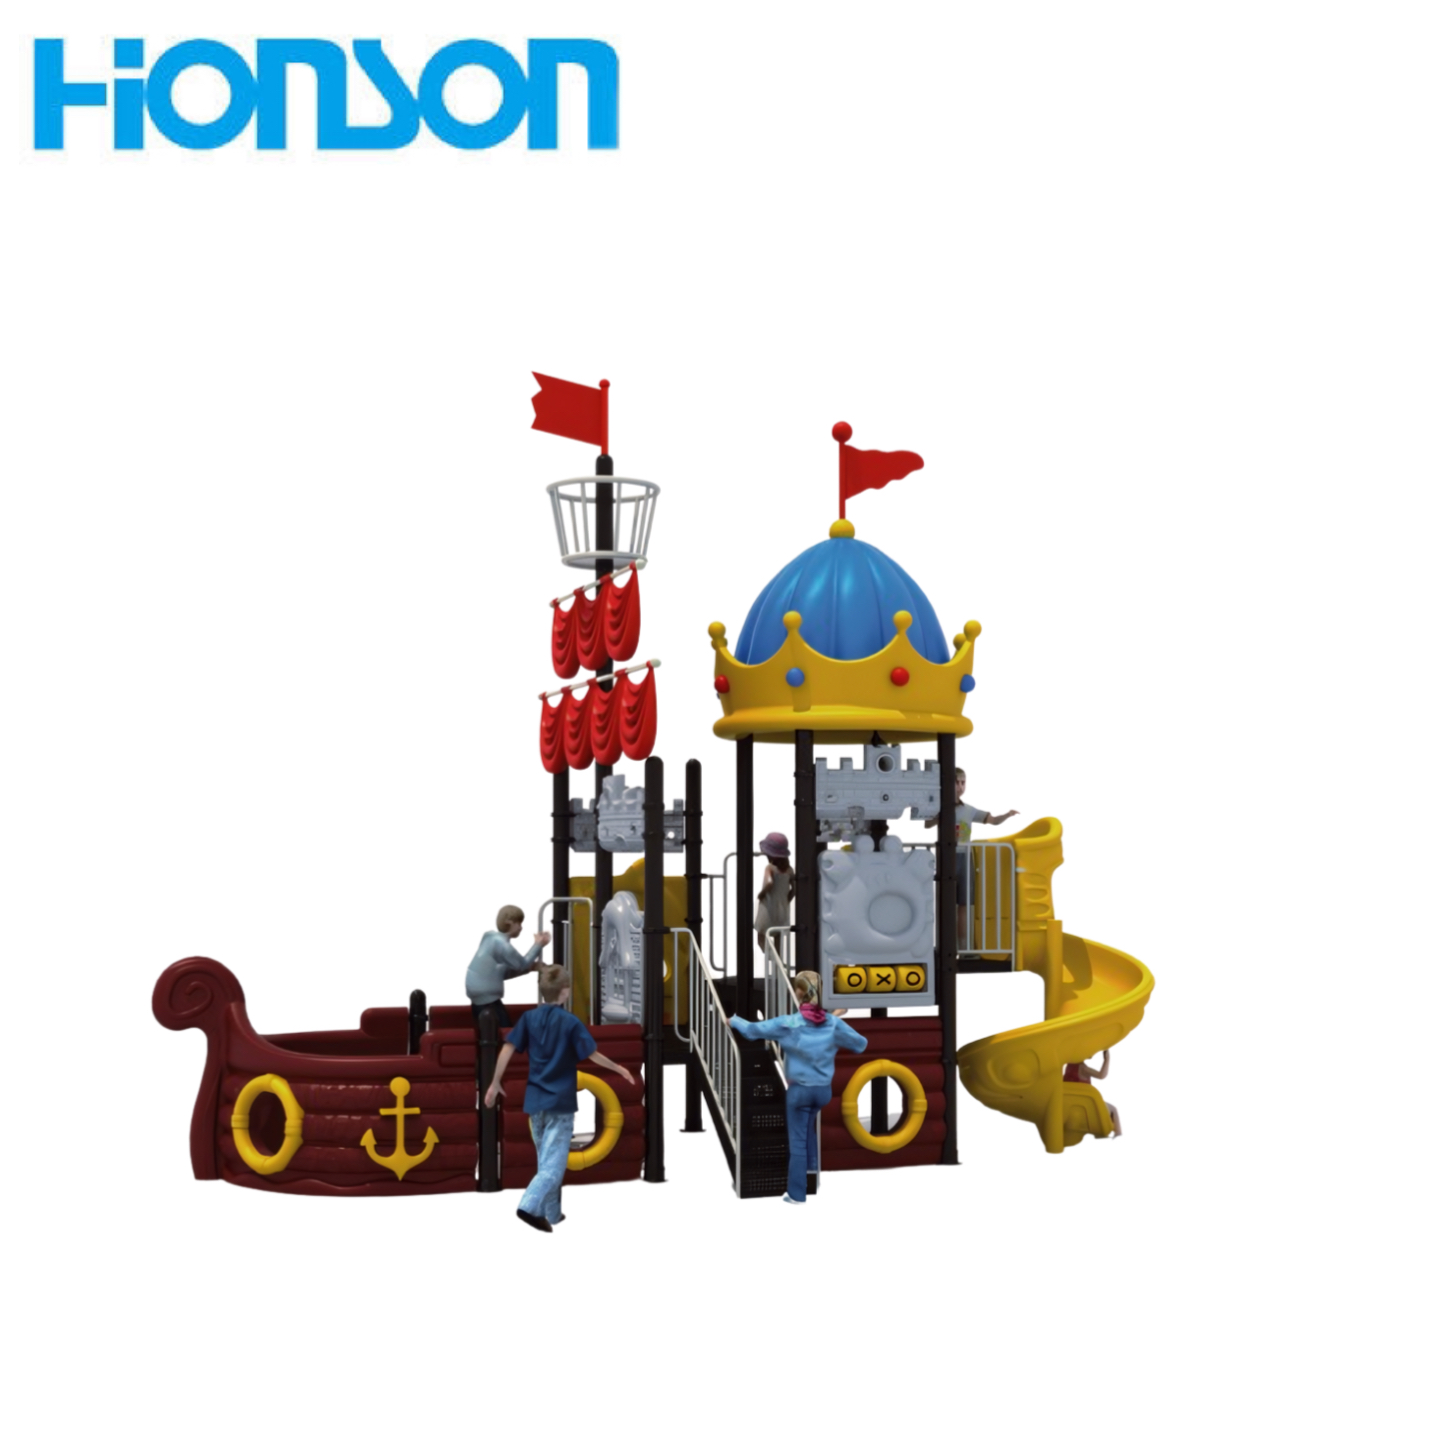 Elevate Your Play Experience with High-Quality Indoor and Outdoor Play Equipment from Our Factory